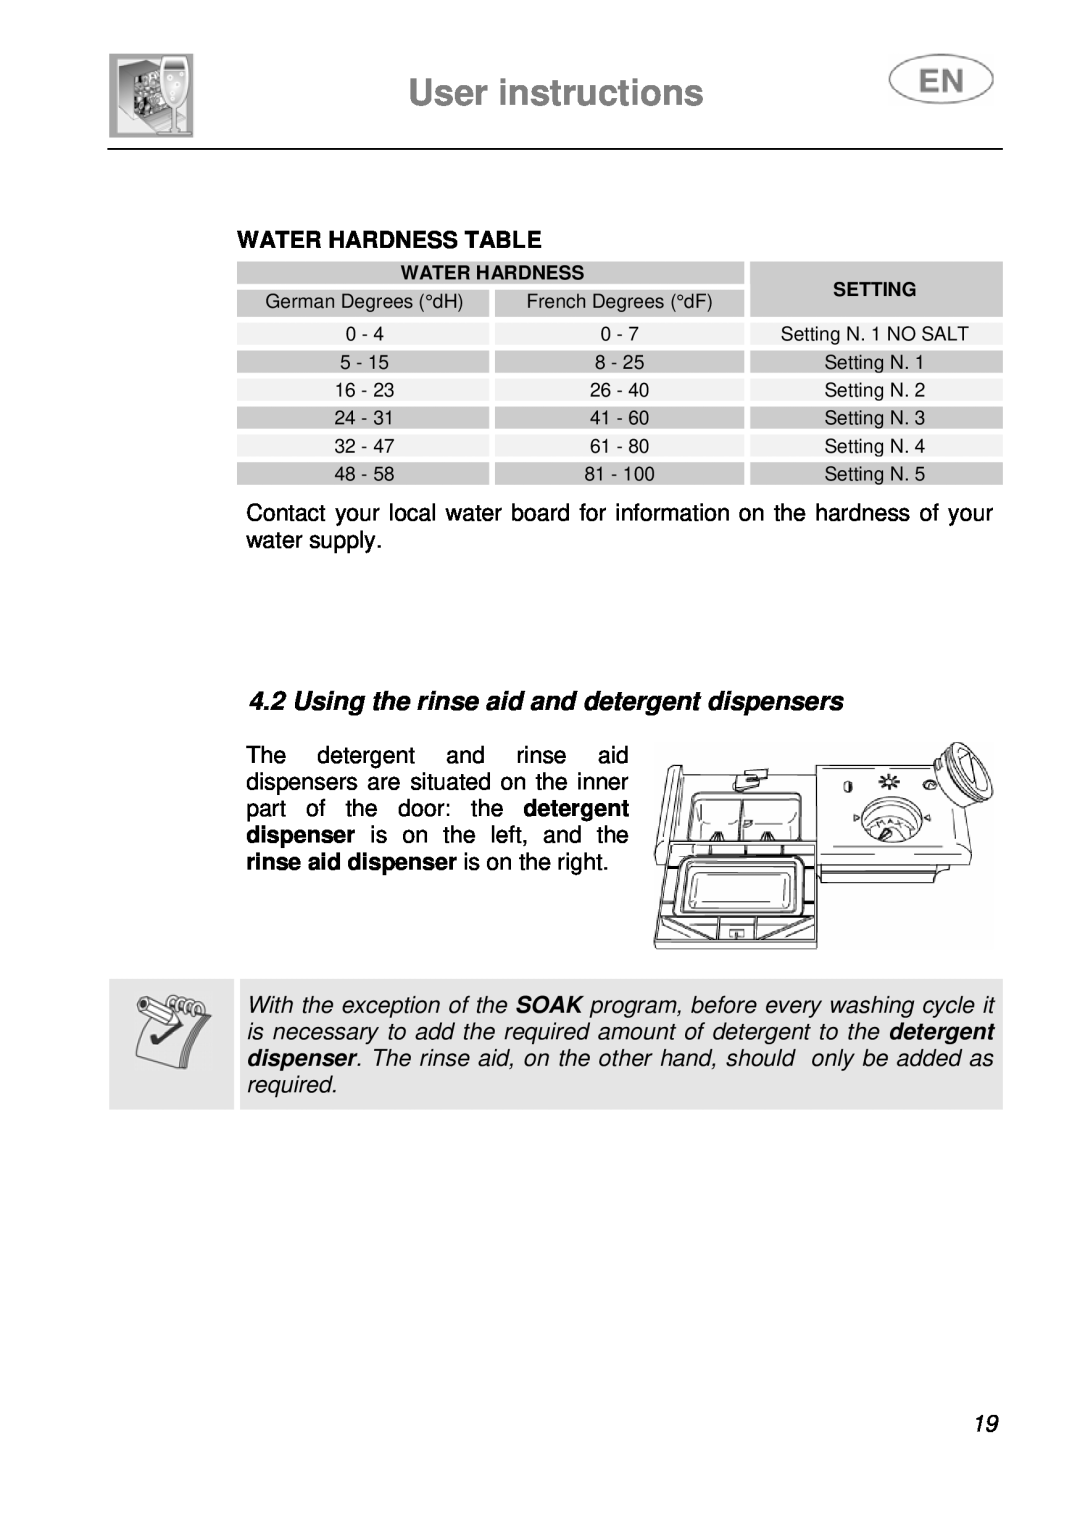 Smeg LSA643XPQ instruction manual User instructions, Using the rinse aid and detergent dispensers, Water Hardness Table 